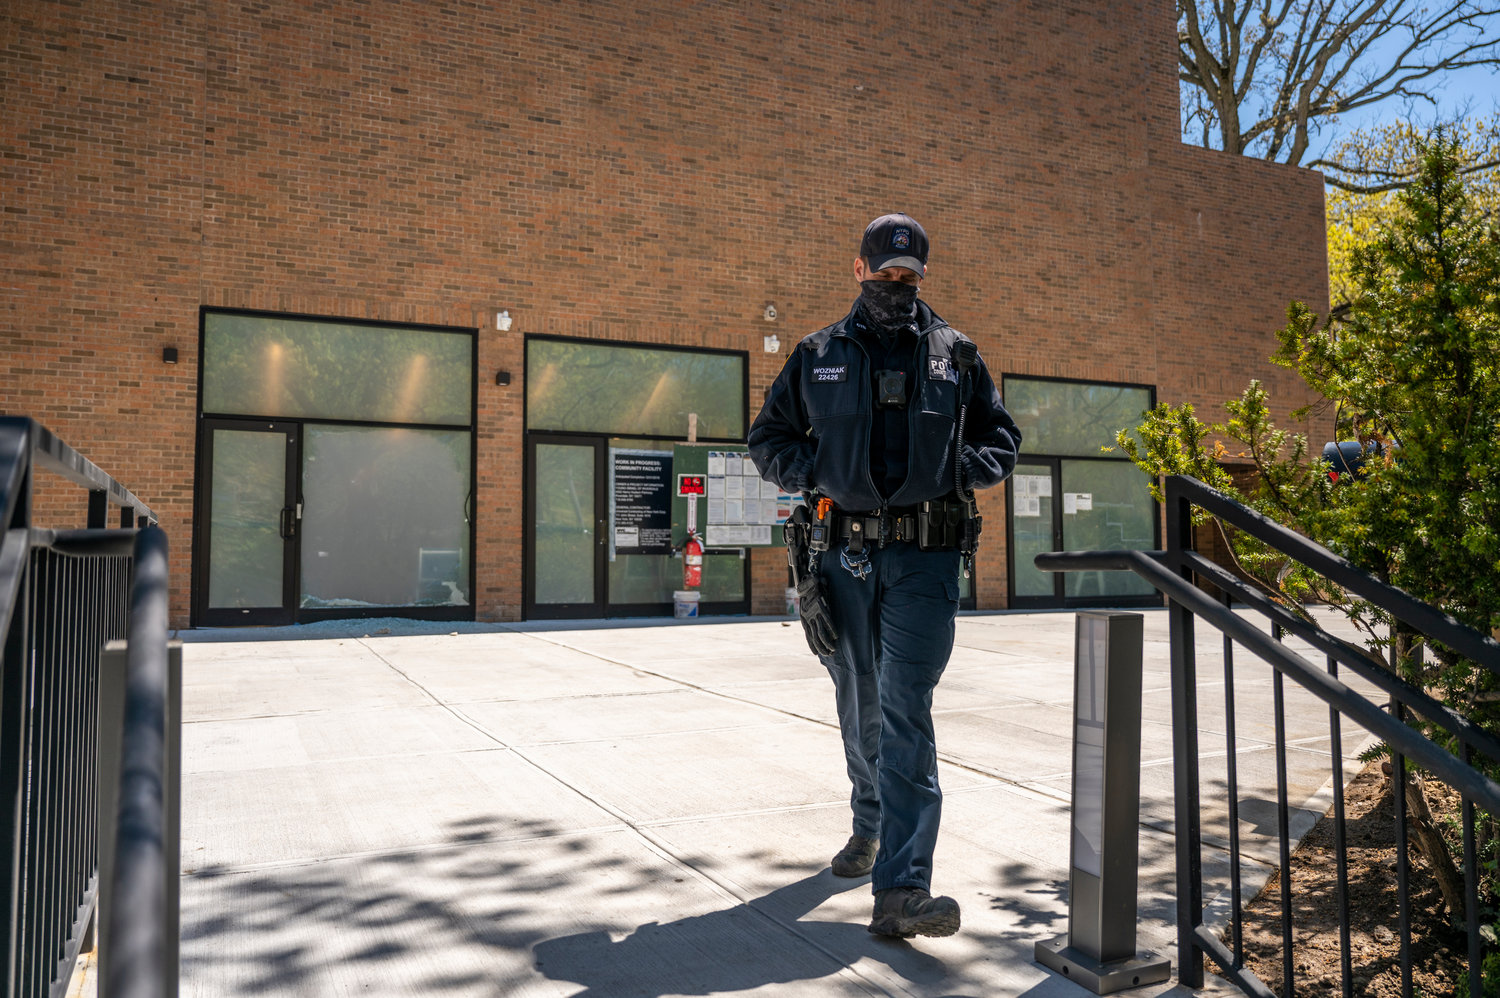 In wake of four vandalism attacks in the area targeting synagogues, Young Israel of Riverdale is one of four shuls seeing increased police presence. The other properties finding broken windows included Chabad Lubavitch of Riverdale, Conservative Synagogue Adath Israel of Riverdale, and the Riverdale Jewish Center.